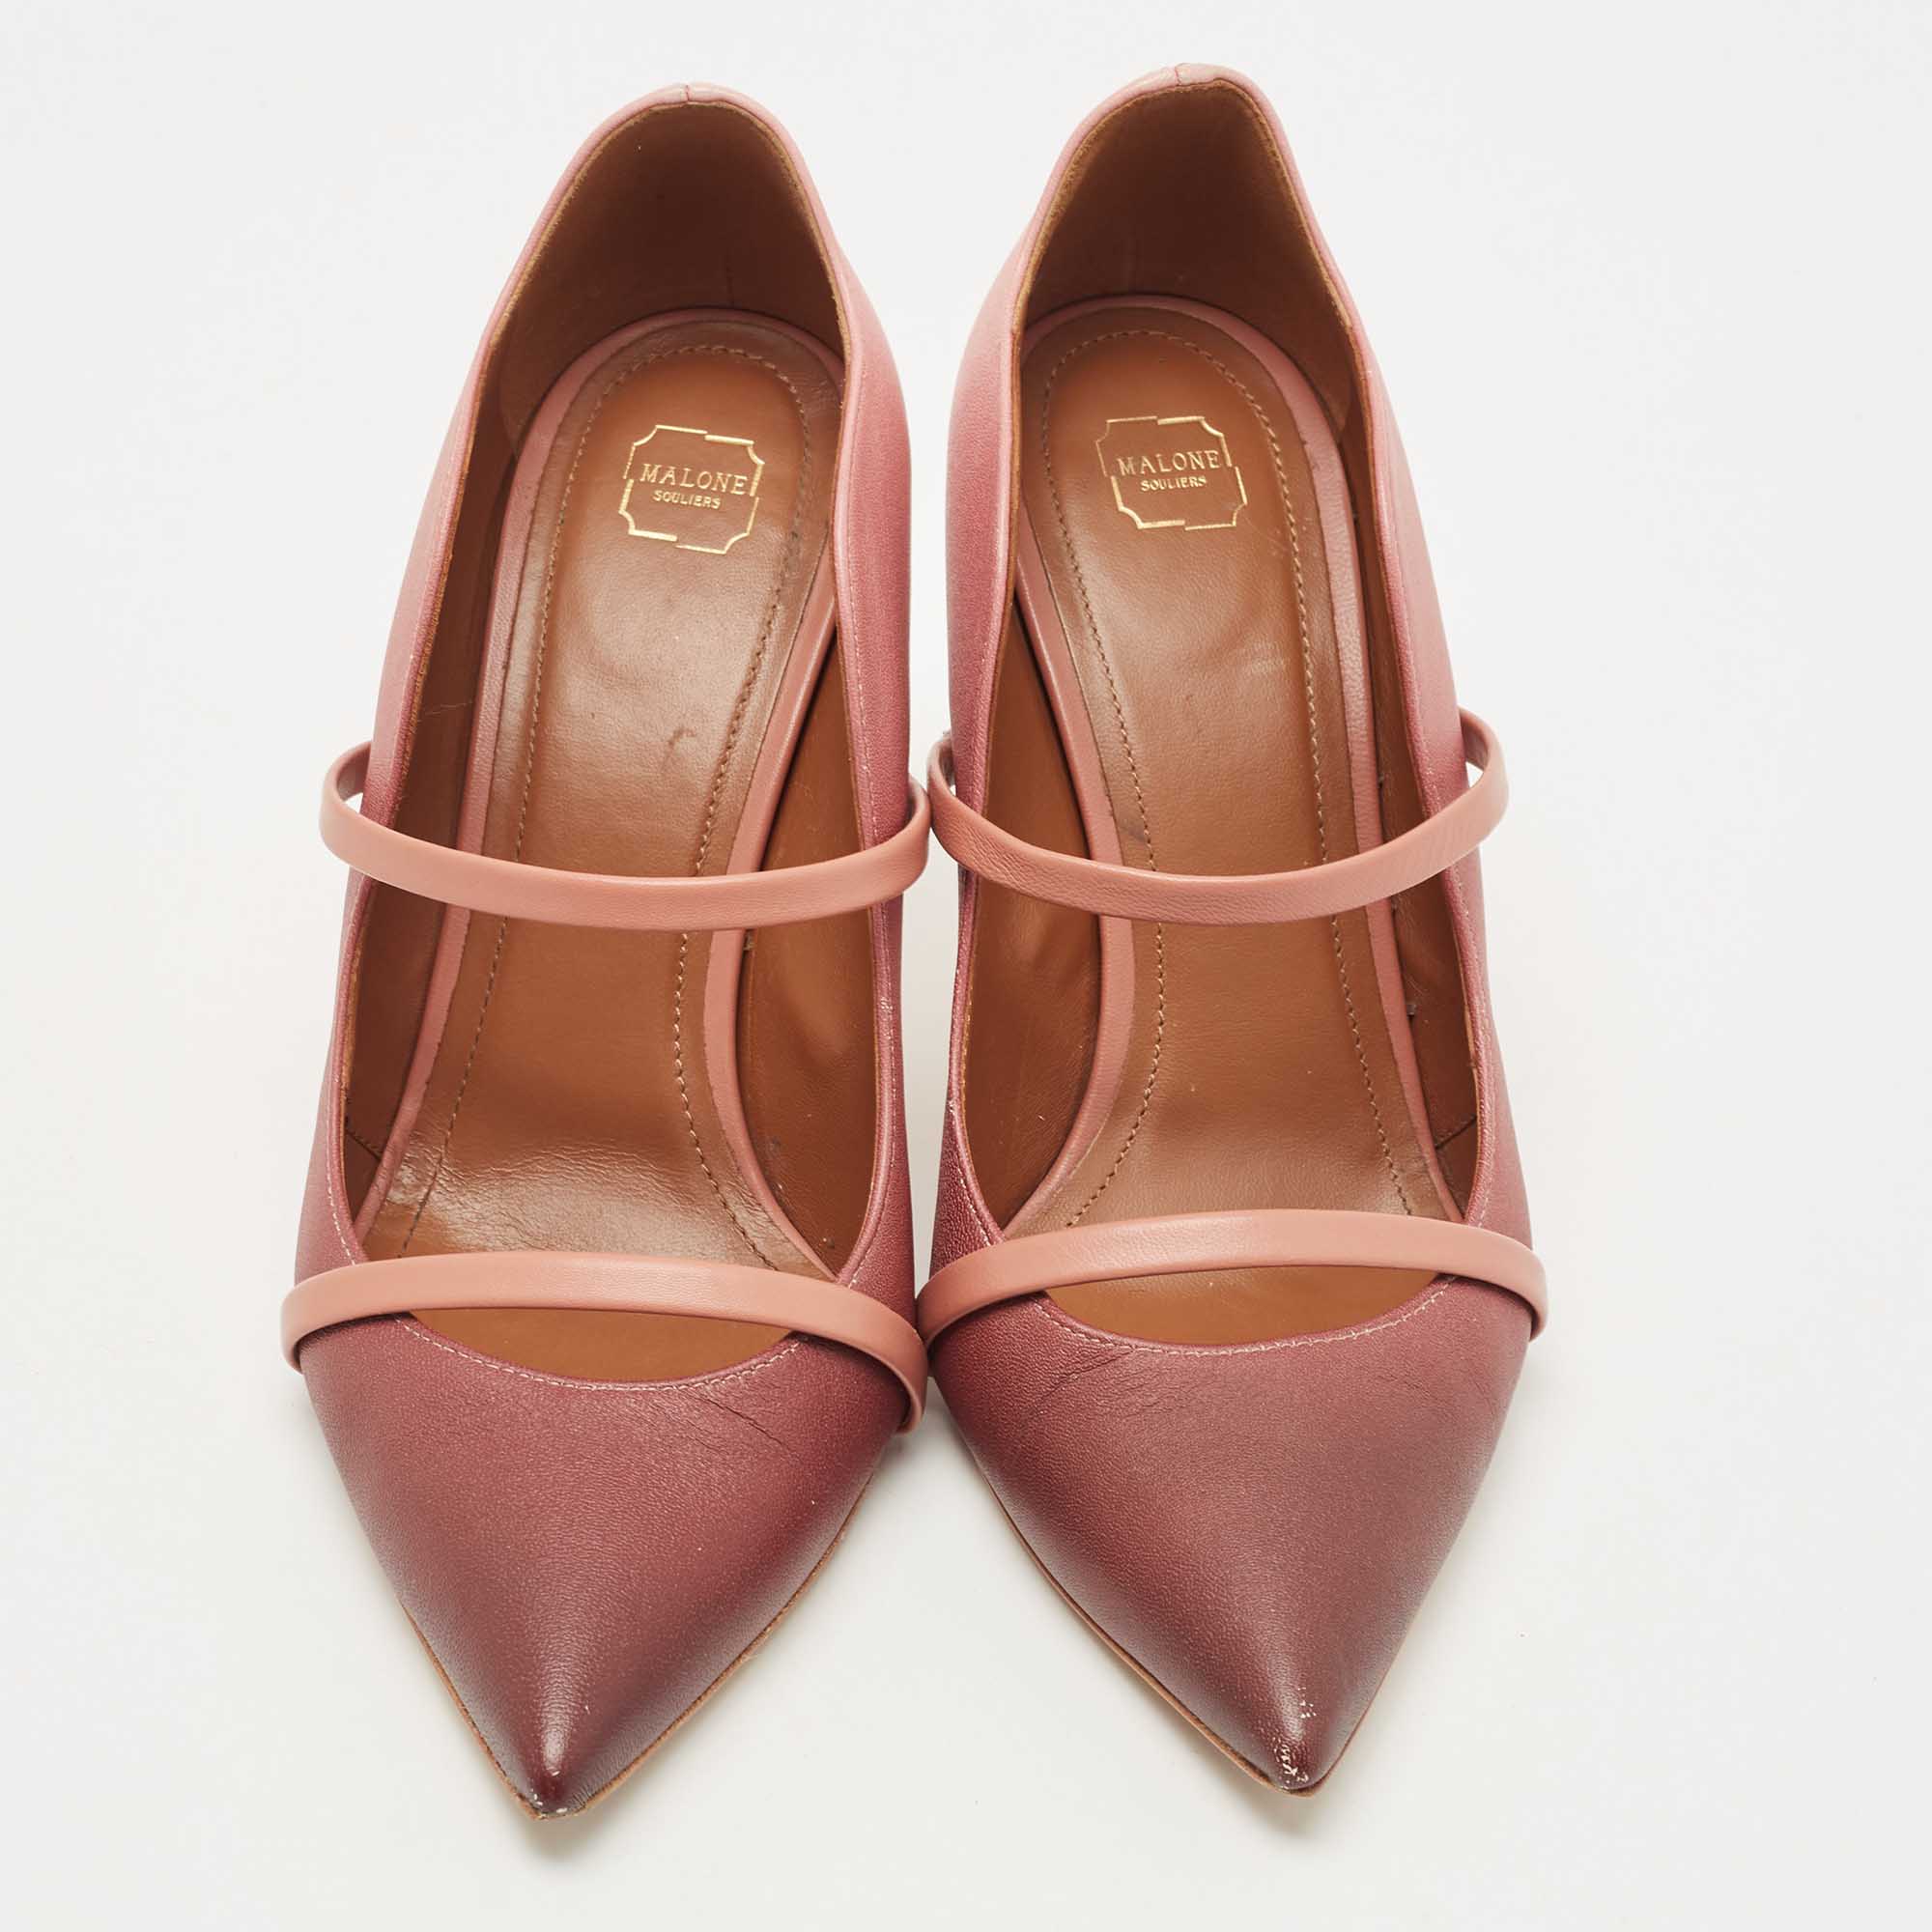 Malone Souliers Pink/Burgundy Leather Maureen Pointed Toe Pumps Size 40